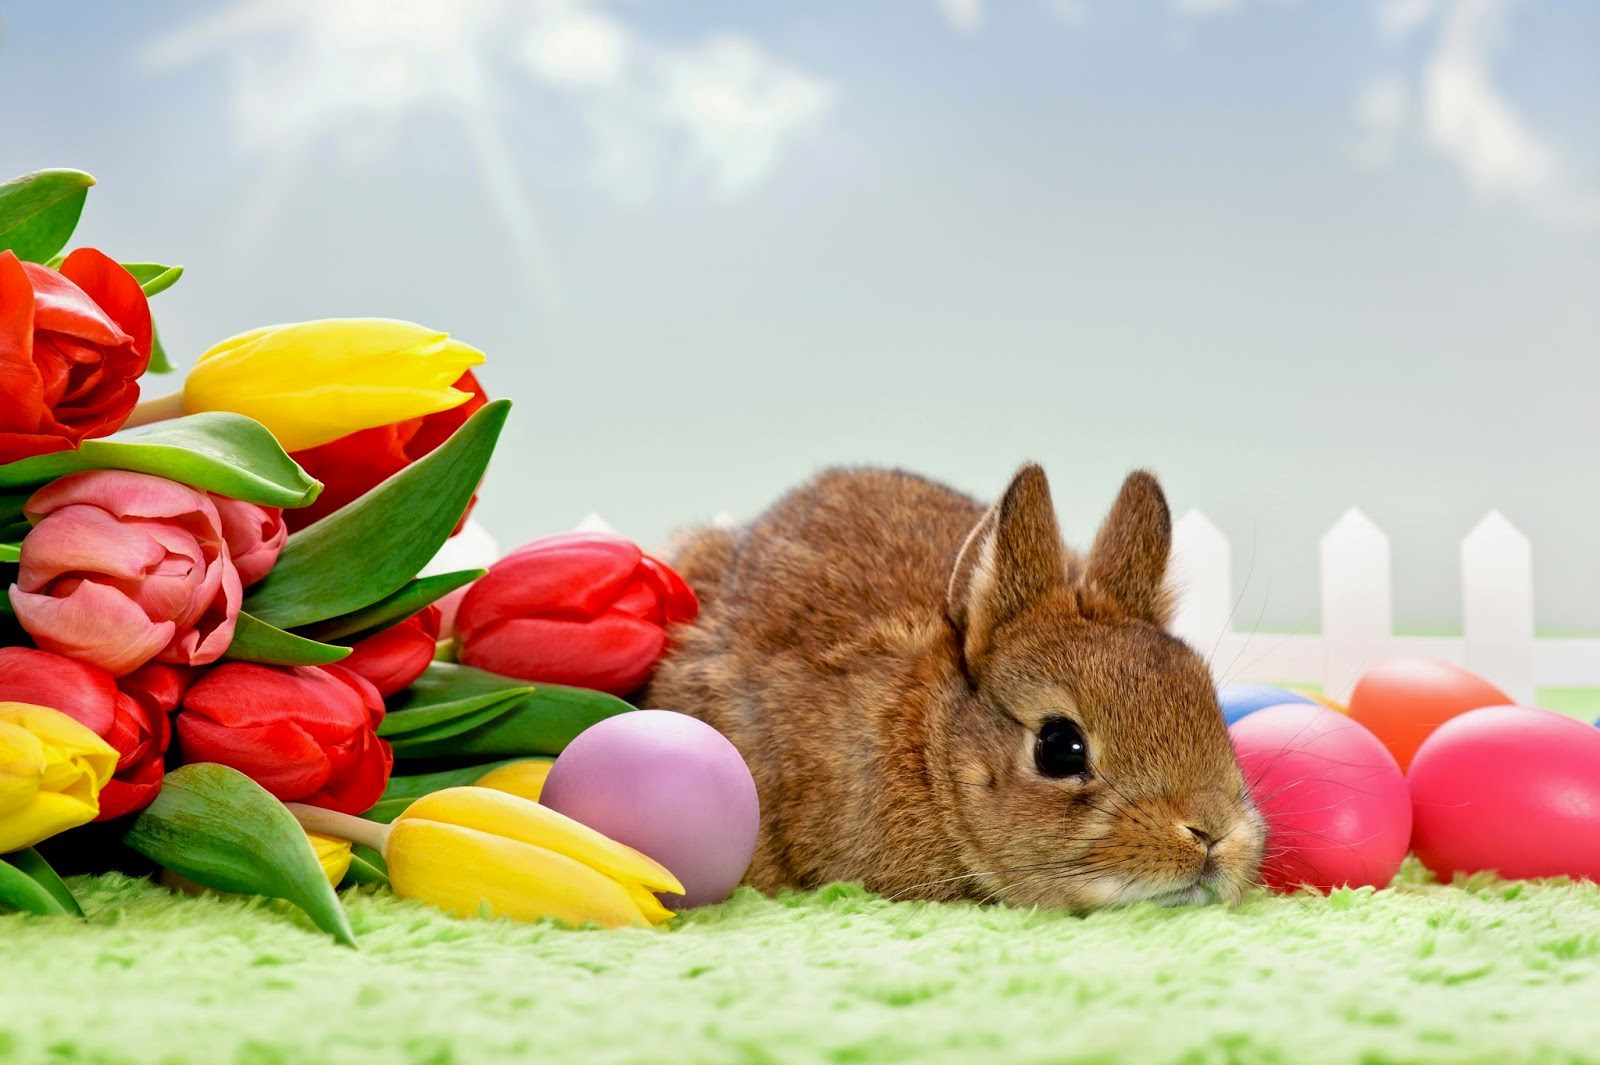 Happy Easter 2016 Wishes Images Eggs Wallpaper pictures